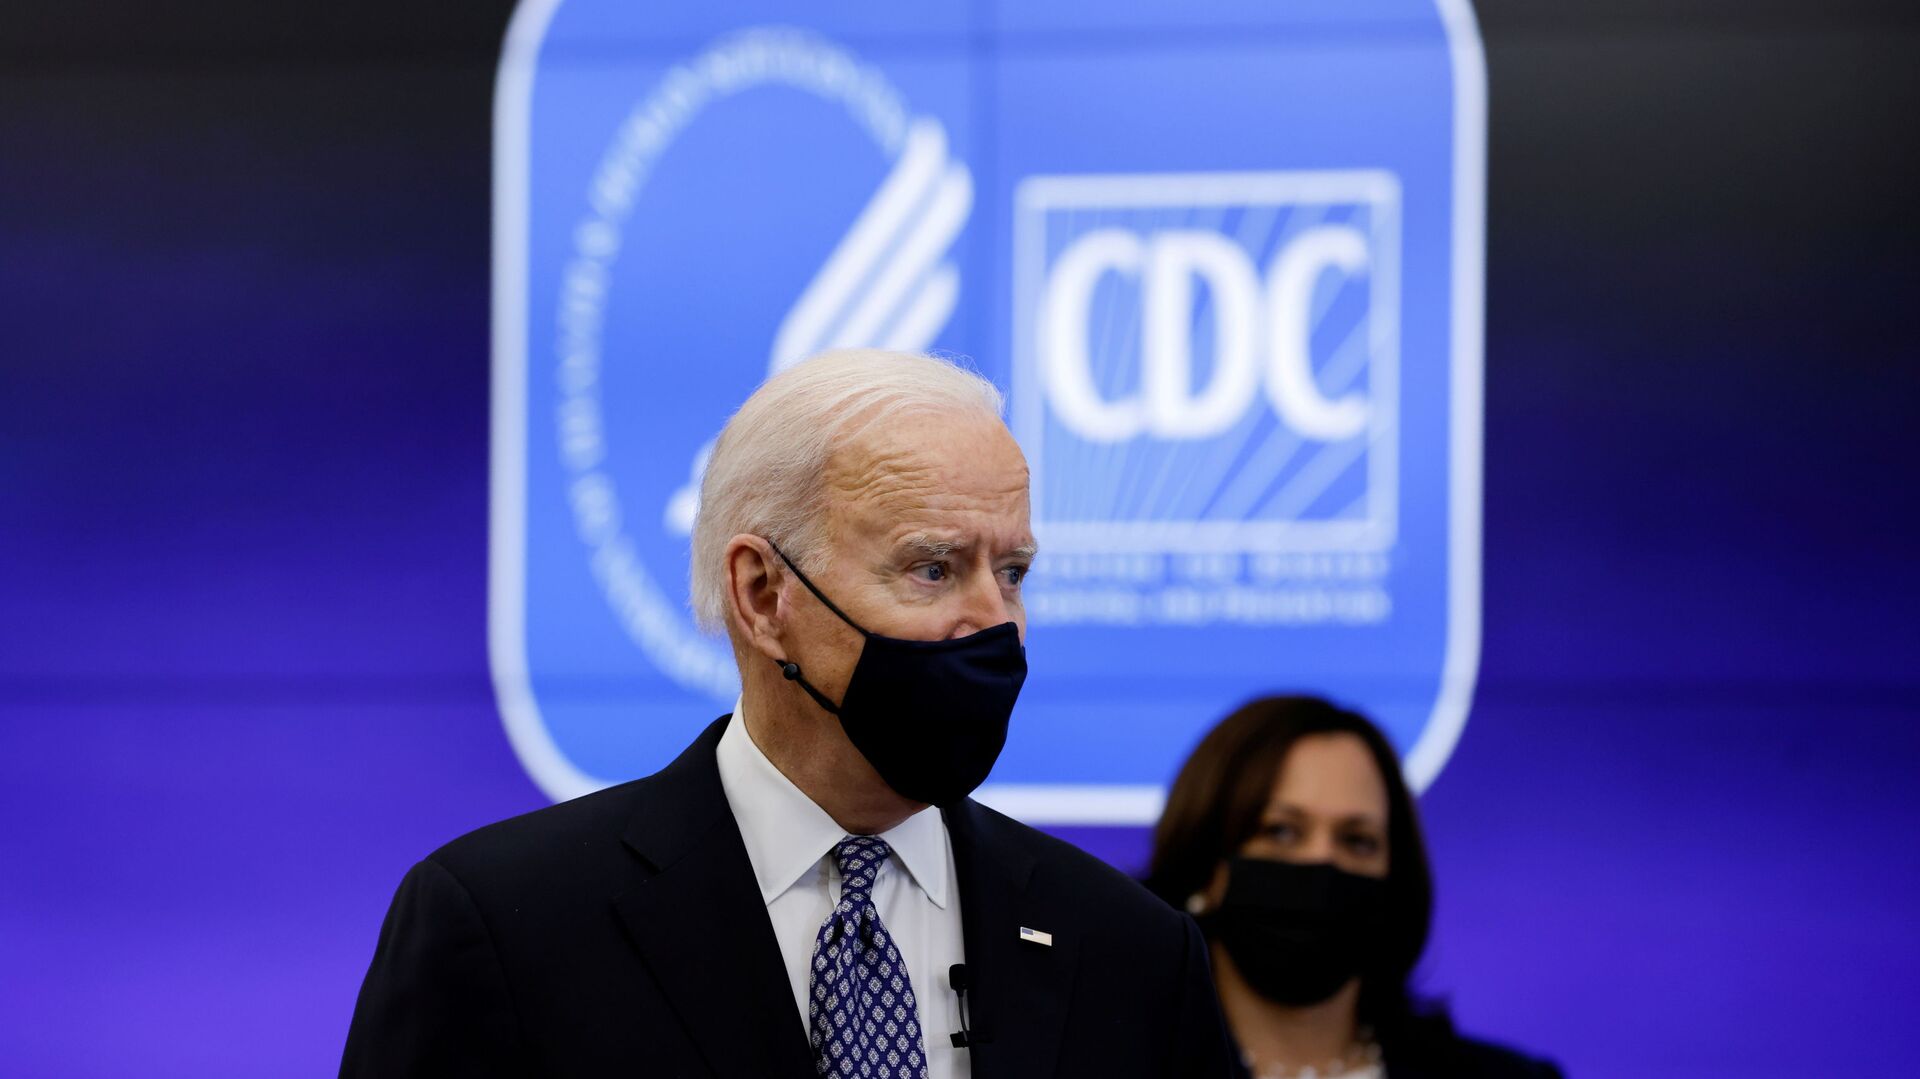 U.S. President Joe Biden and Vice President Kamala Harris receive an update on the fight against the coronavirus disease (COVID-19) pandemic as they visit the Centers for Disease Control and Prevention (CDC) in Atlanta, Georgia, U.S., March 19, 2021 - Sputnik International, 1920, 04.01.2022